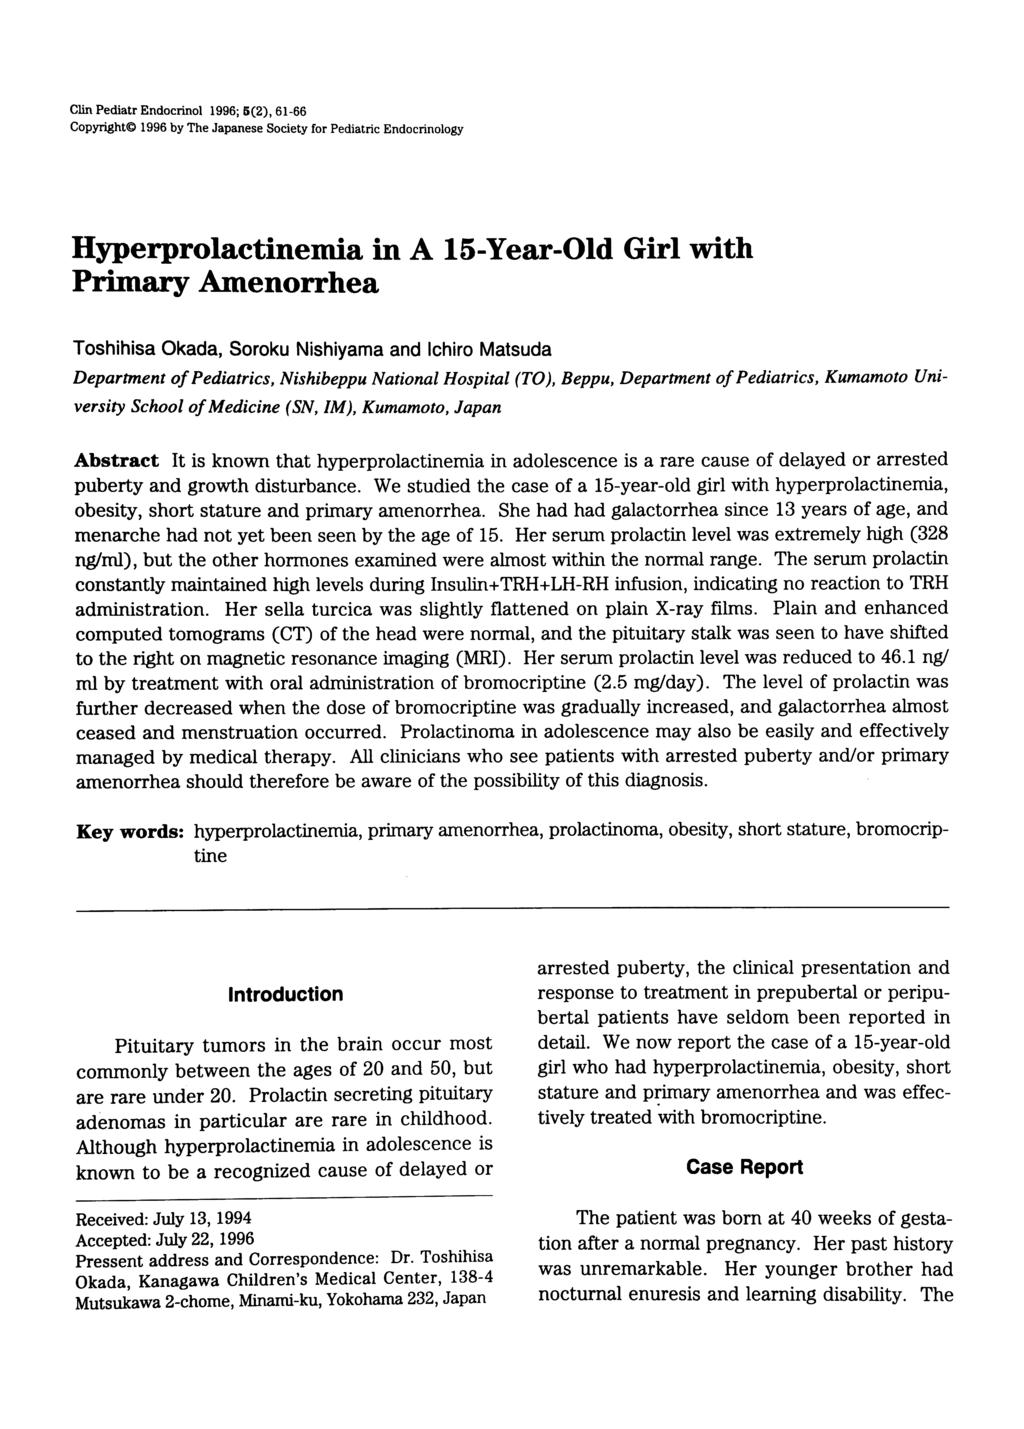 Clin Pediatr Endocrinol 1996; 5(2), 61-66 Copyright (C) 1996 by The Japanese Society for Pediatric Endocrinology Hyperprolactinemia in A 15-Year-Old Girl with Primary Amenorrhea Toshihisa Okada,